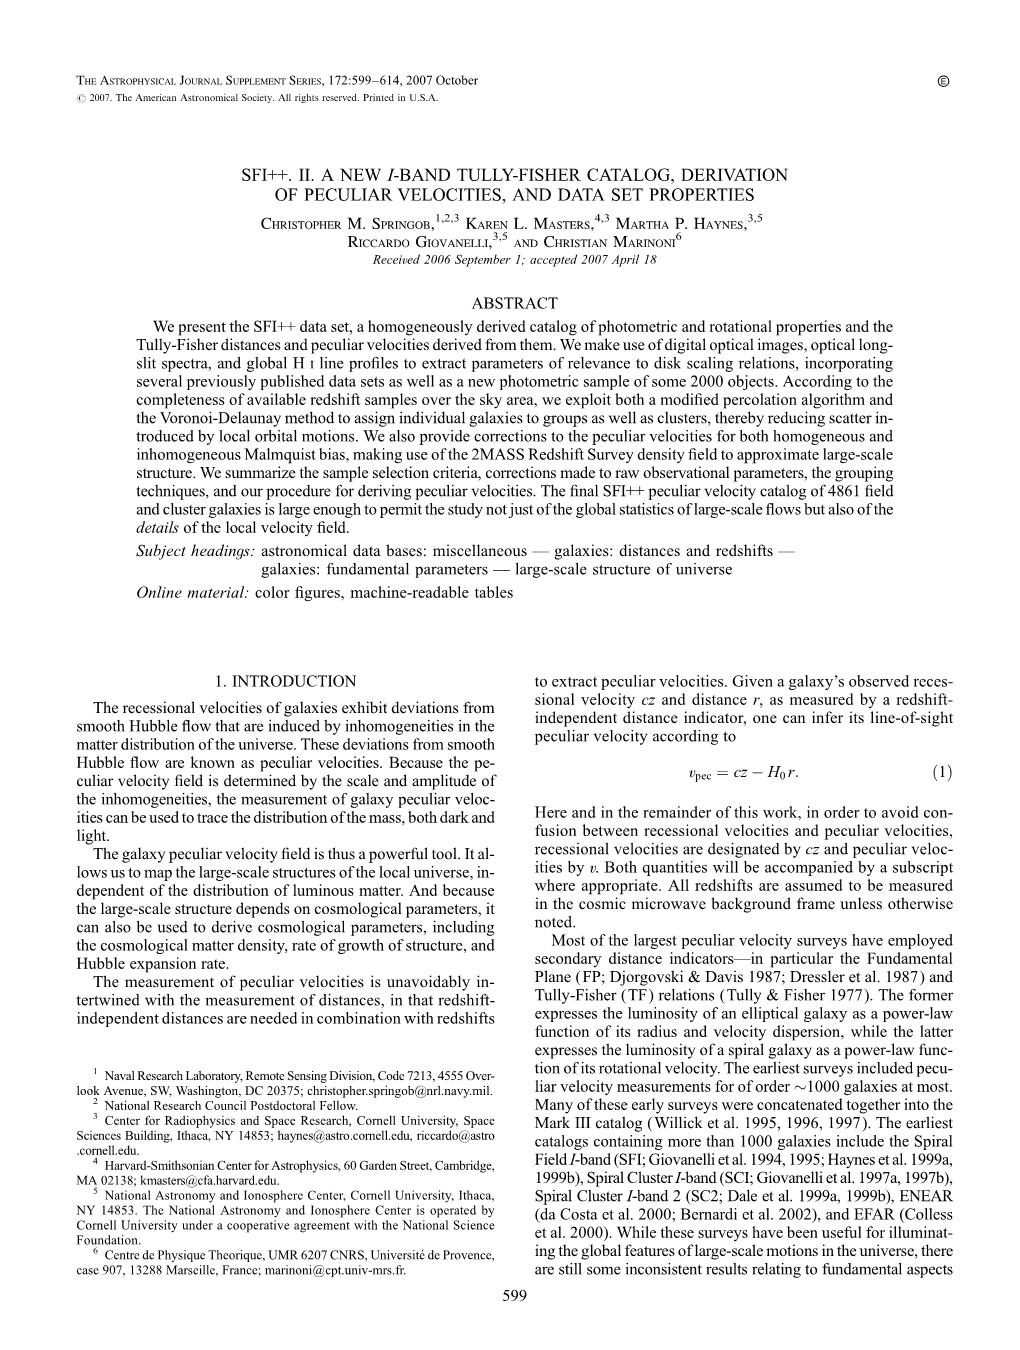 SFI++. II. a NEW I-BAND TULLY-FISHER CATALOG, DERIVATION of PECULIAR VELOCITIES, and DATA SET PROPERTIES Christopher M